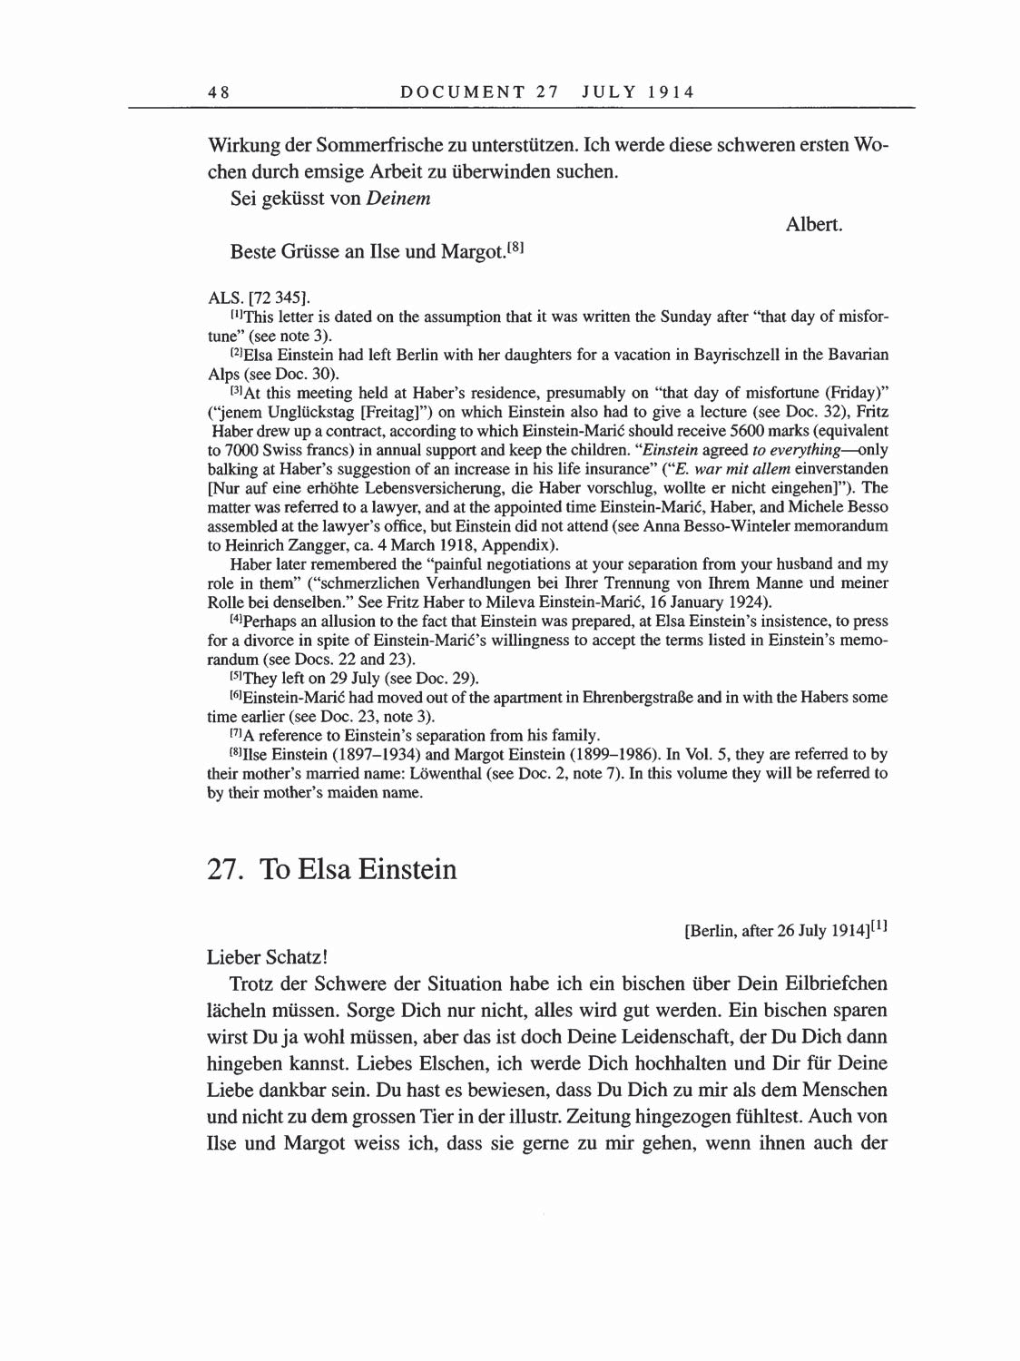 Volume 8, Part A: The Berlin Years: Correspondence 1914-1917 page 48